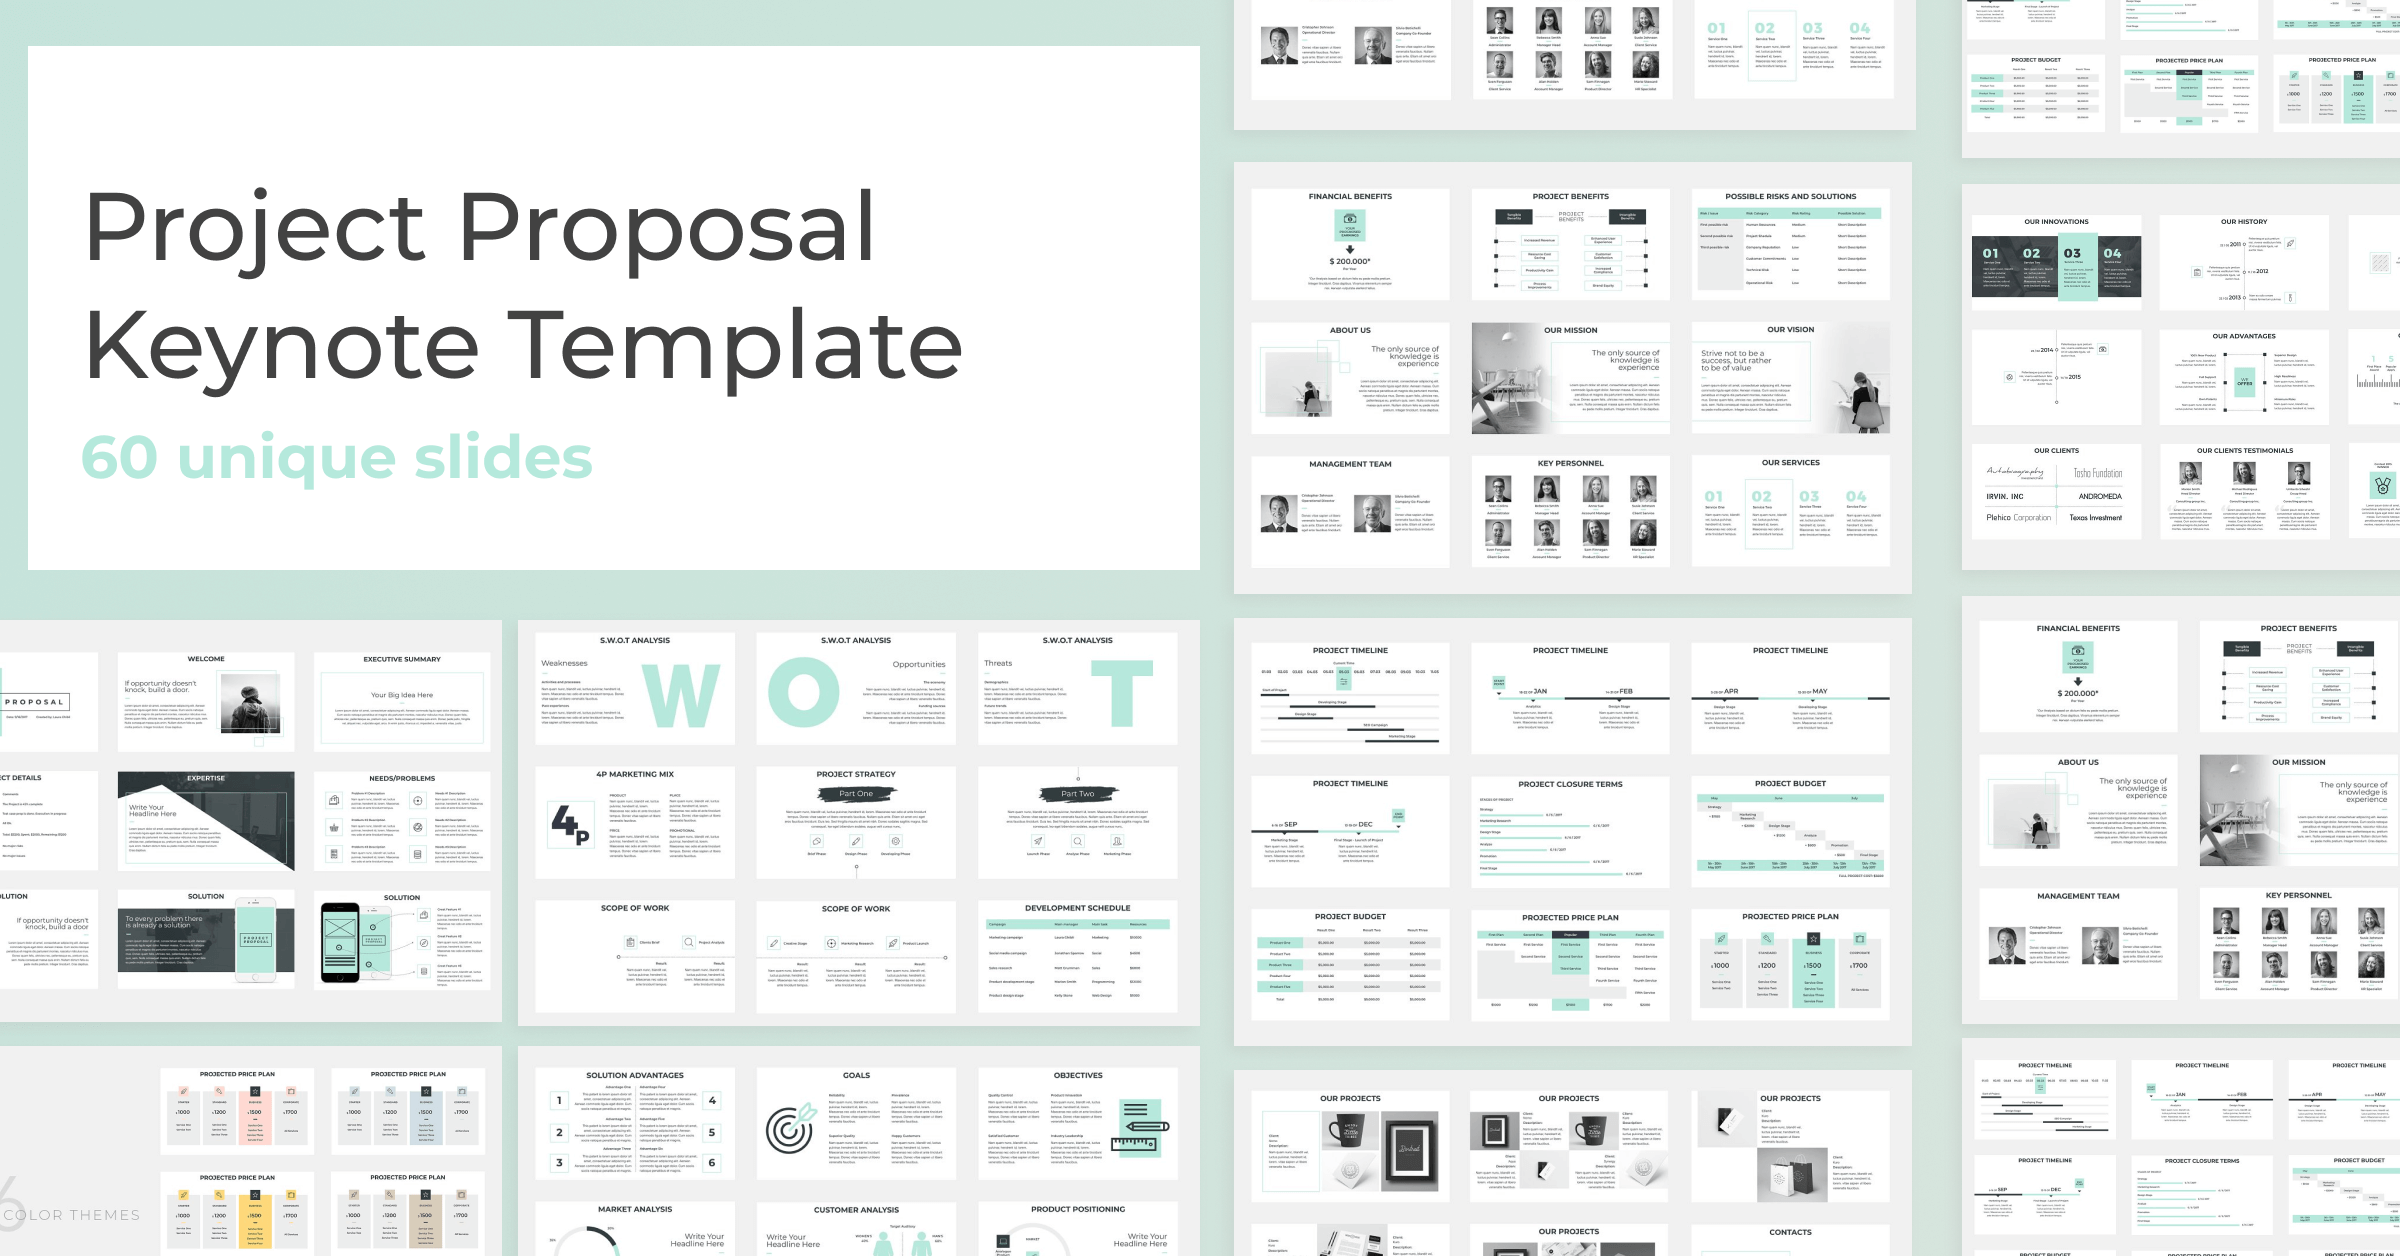 Project proposal keynote template facebook.